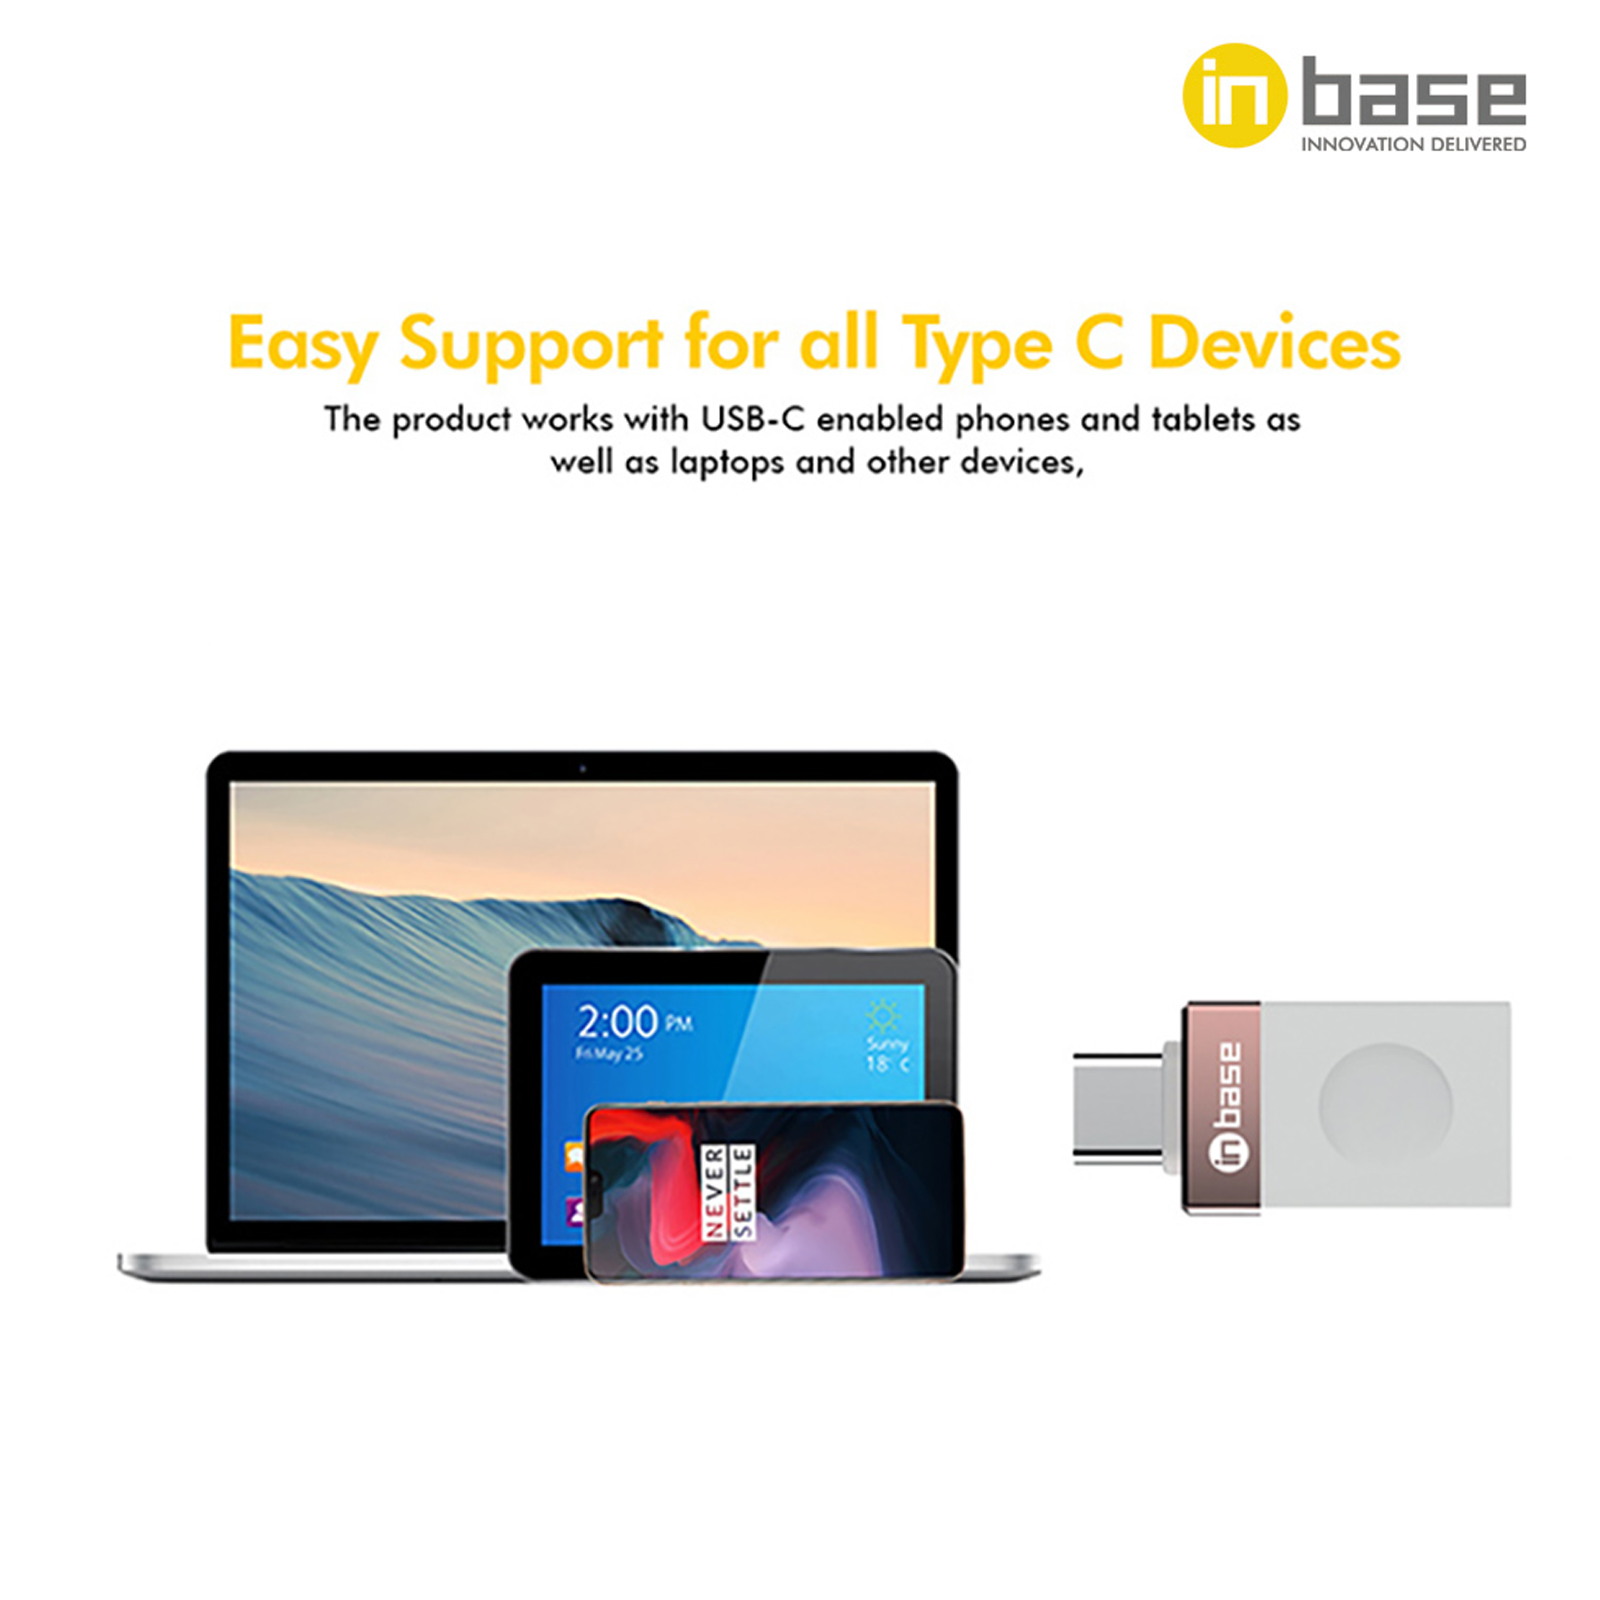 Inbase USB 3.1 Type-A to USB 3.1 Type-C Data Transfer OTG Connector (Safe and Durable, IB-2048, Silver)_2